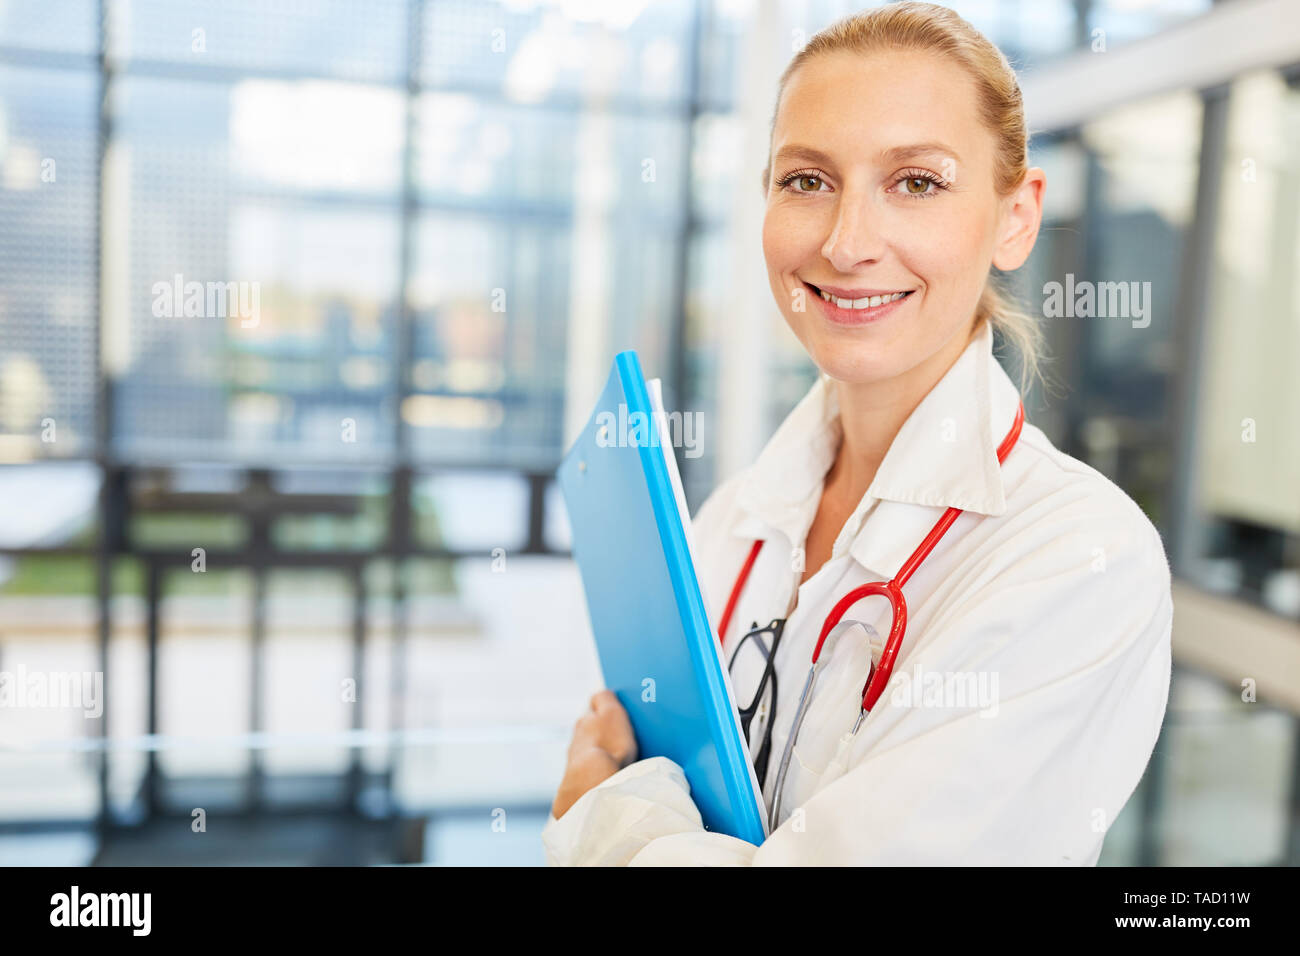 Young friendly female doctor in training or as a medical assistant with patient file Stock Photo